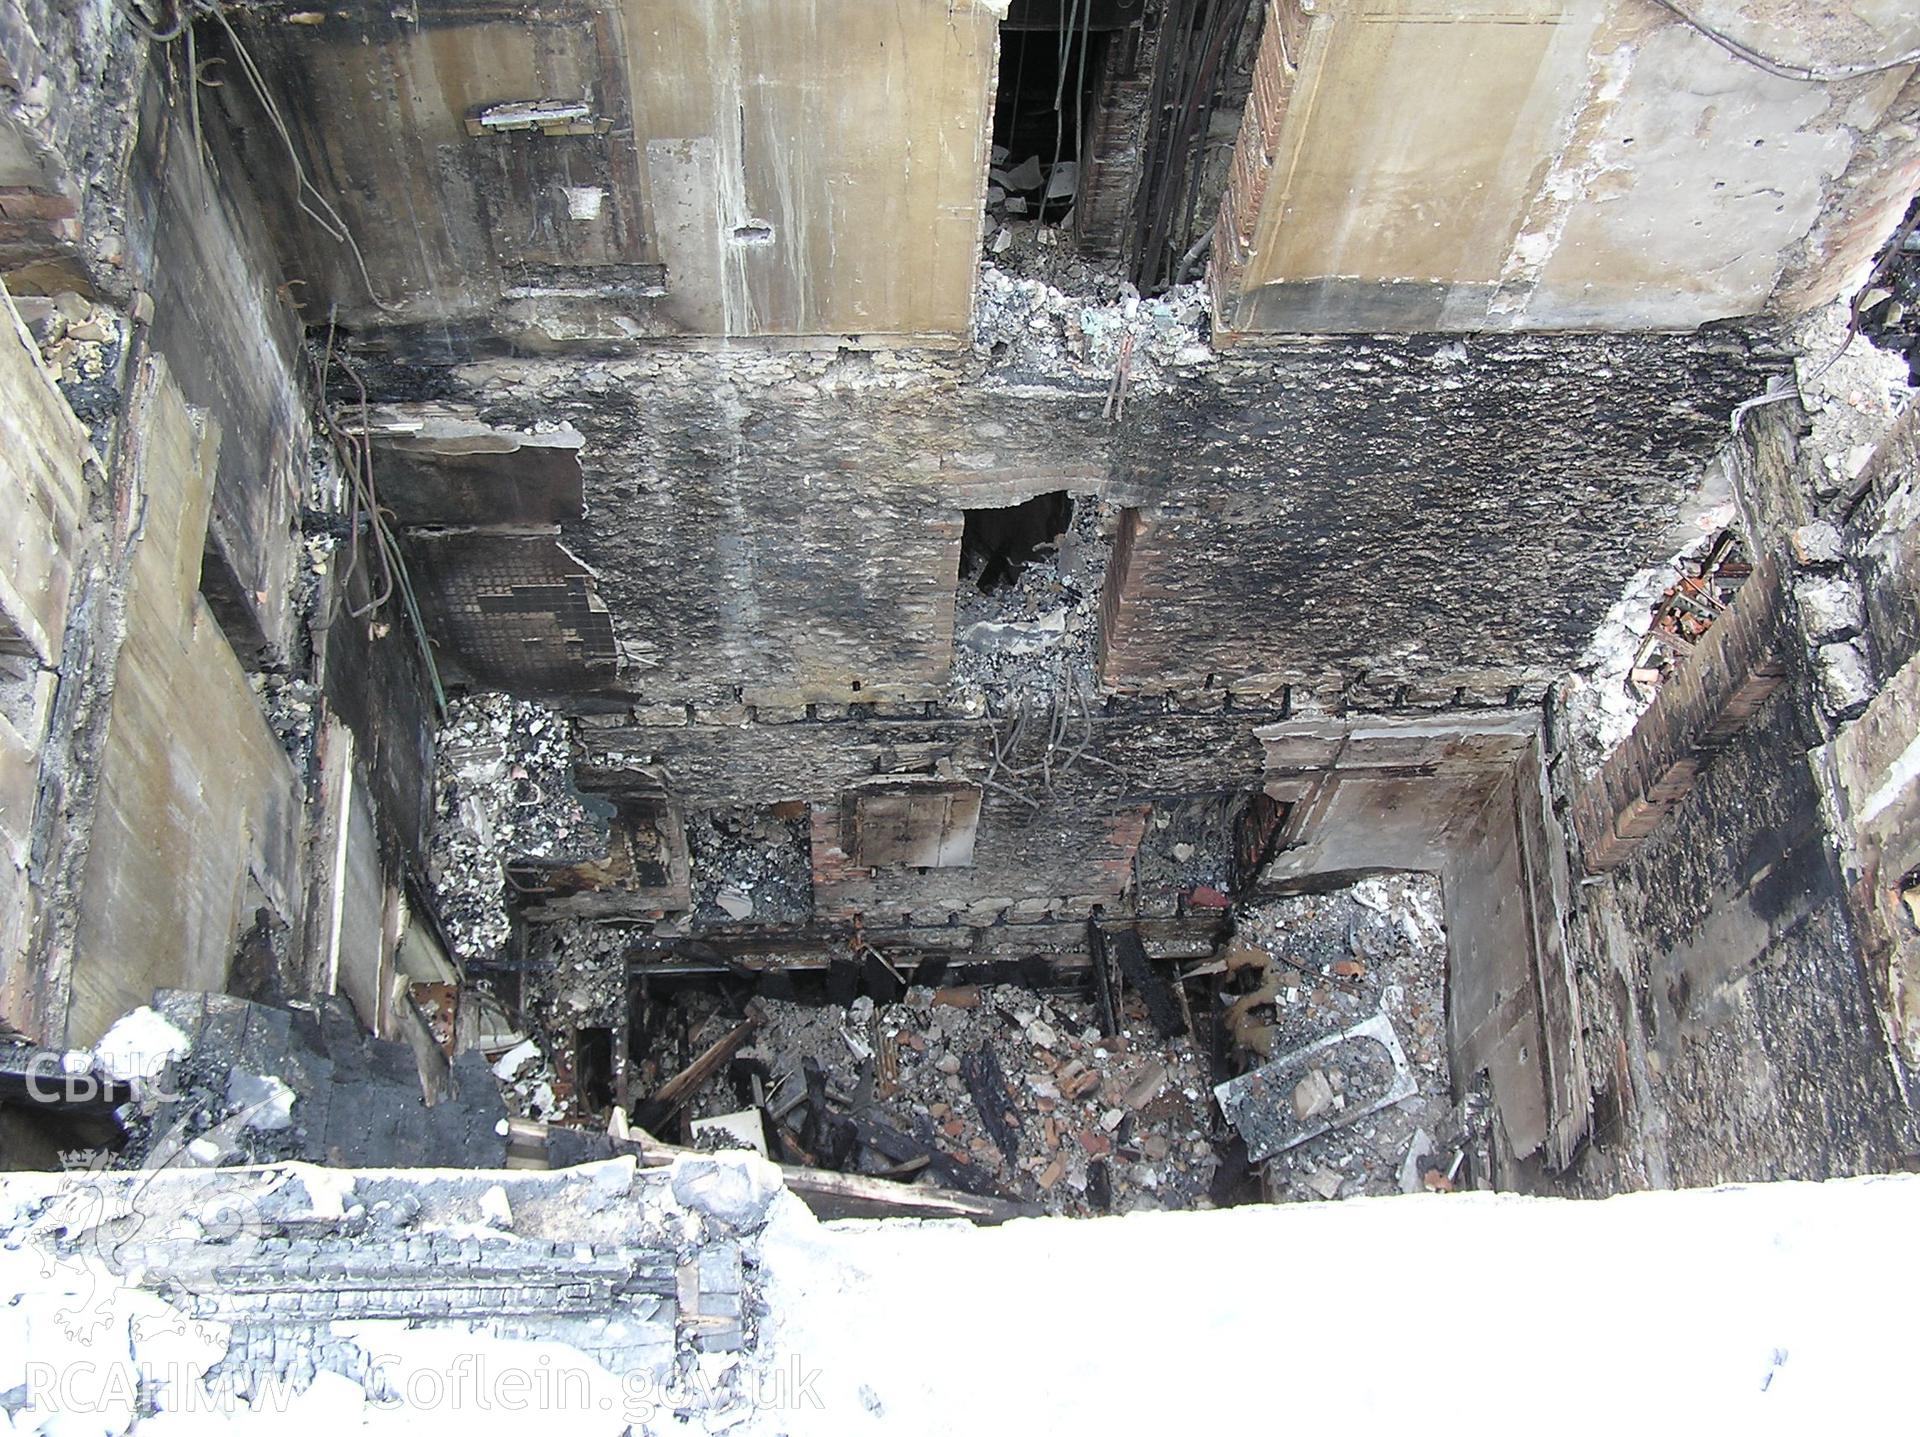 Colour digital photograph showing the damage caused by fire to the interior of the Royal Gatehouse Hotel.